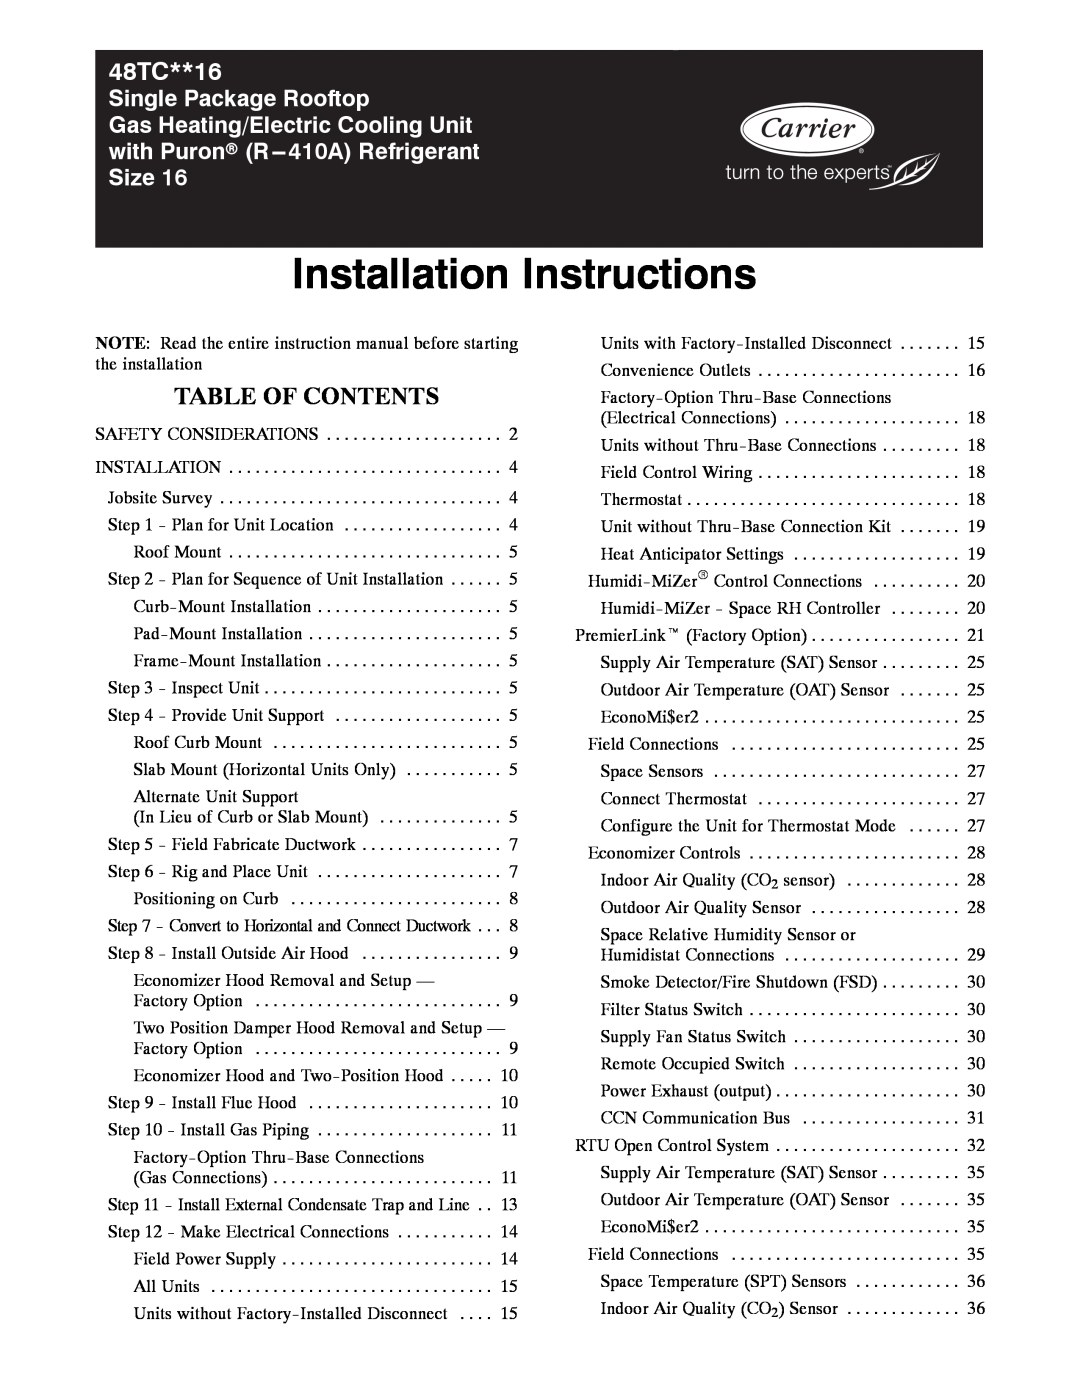 Carrier 48TC**16 installation instructions Table Of Contents, Installation Instructions, Single Package Rooftop 